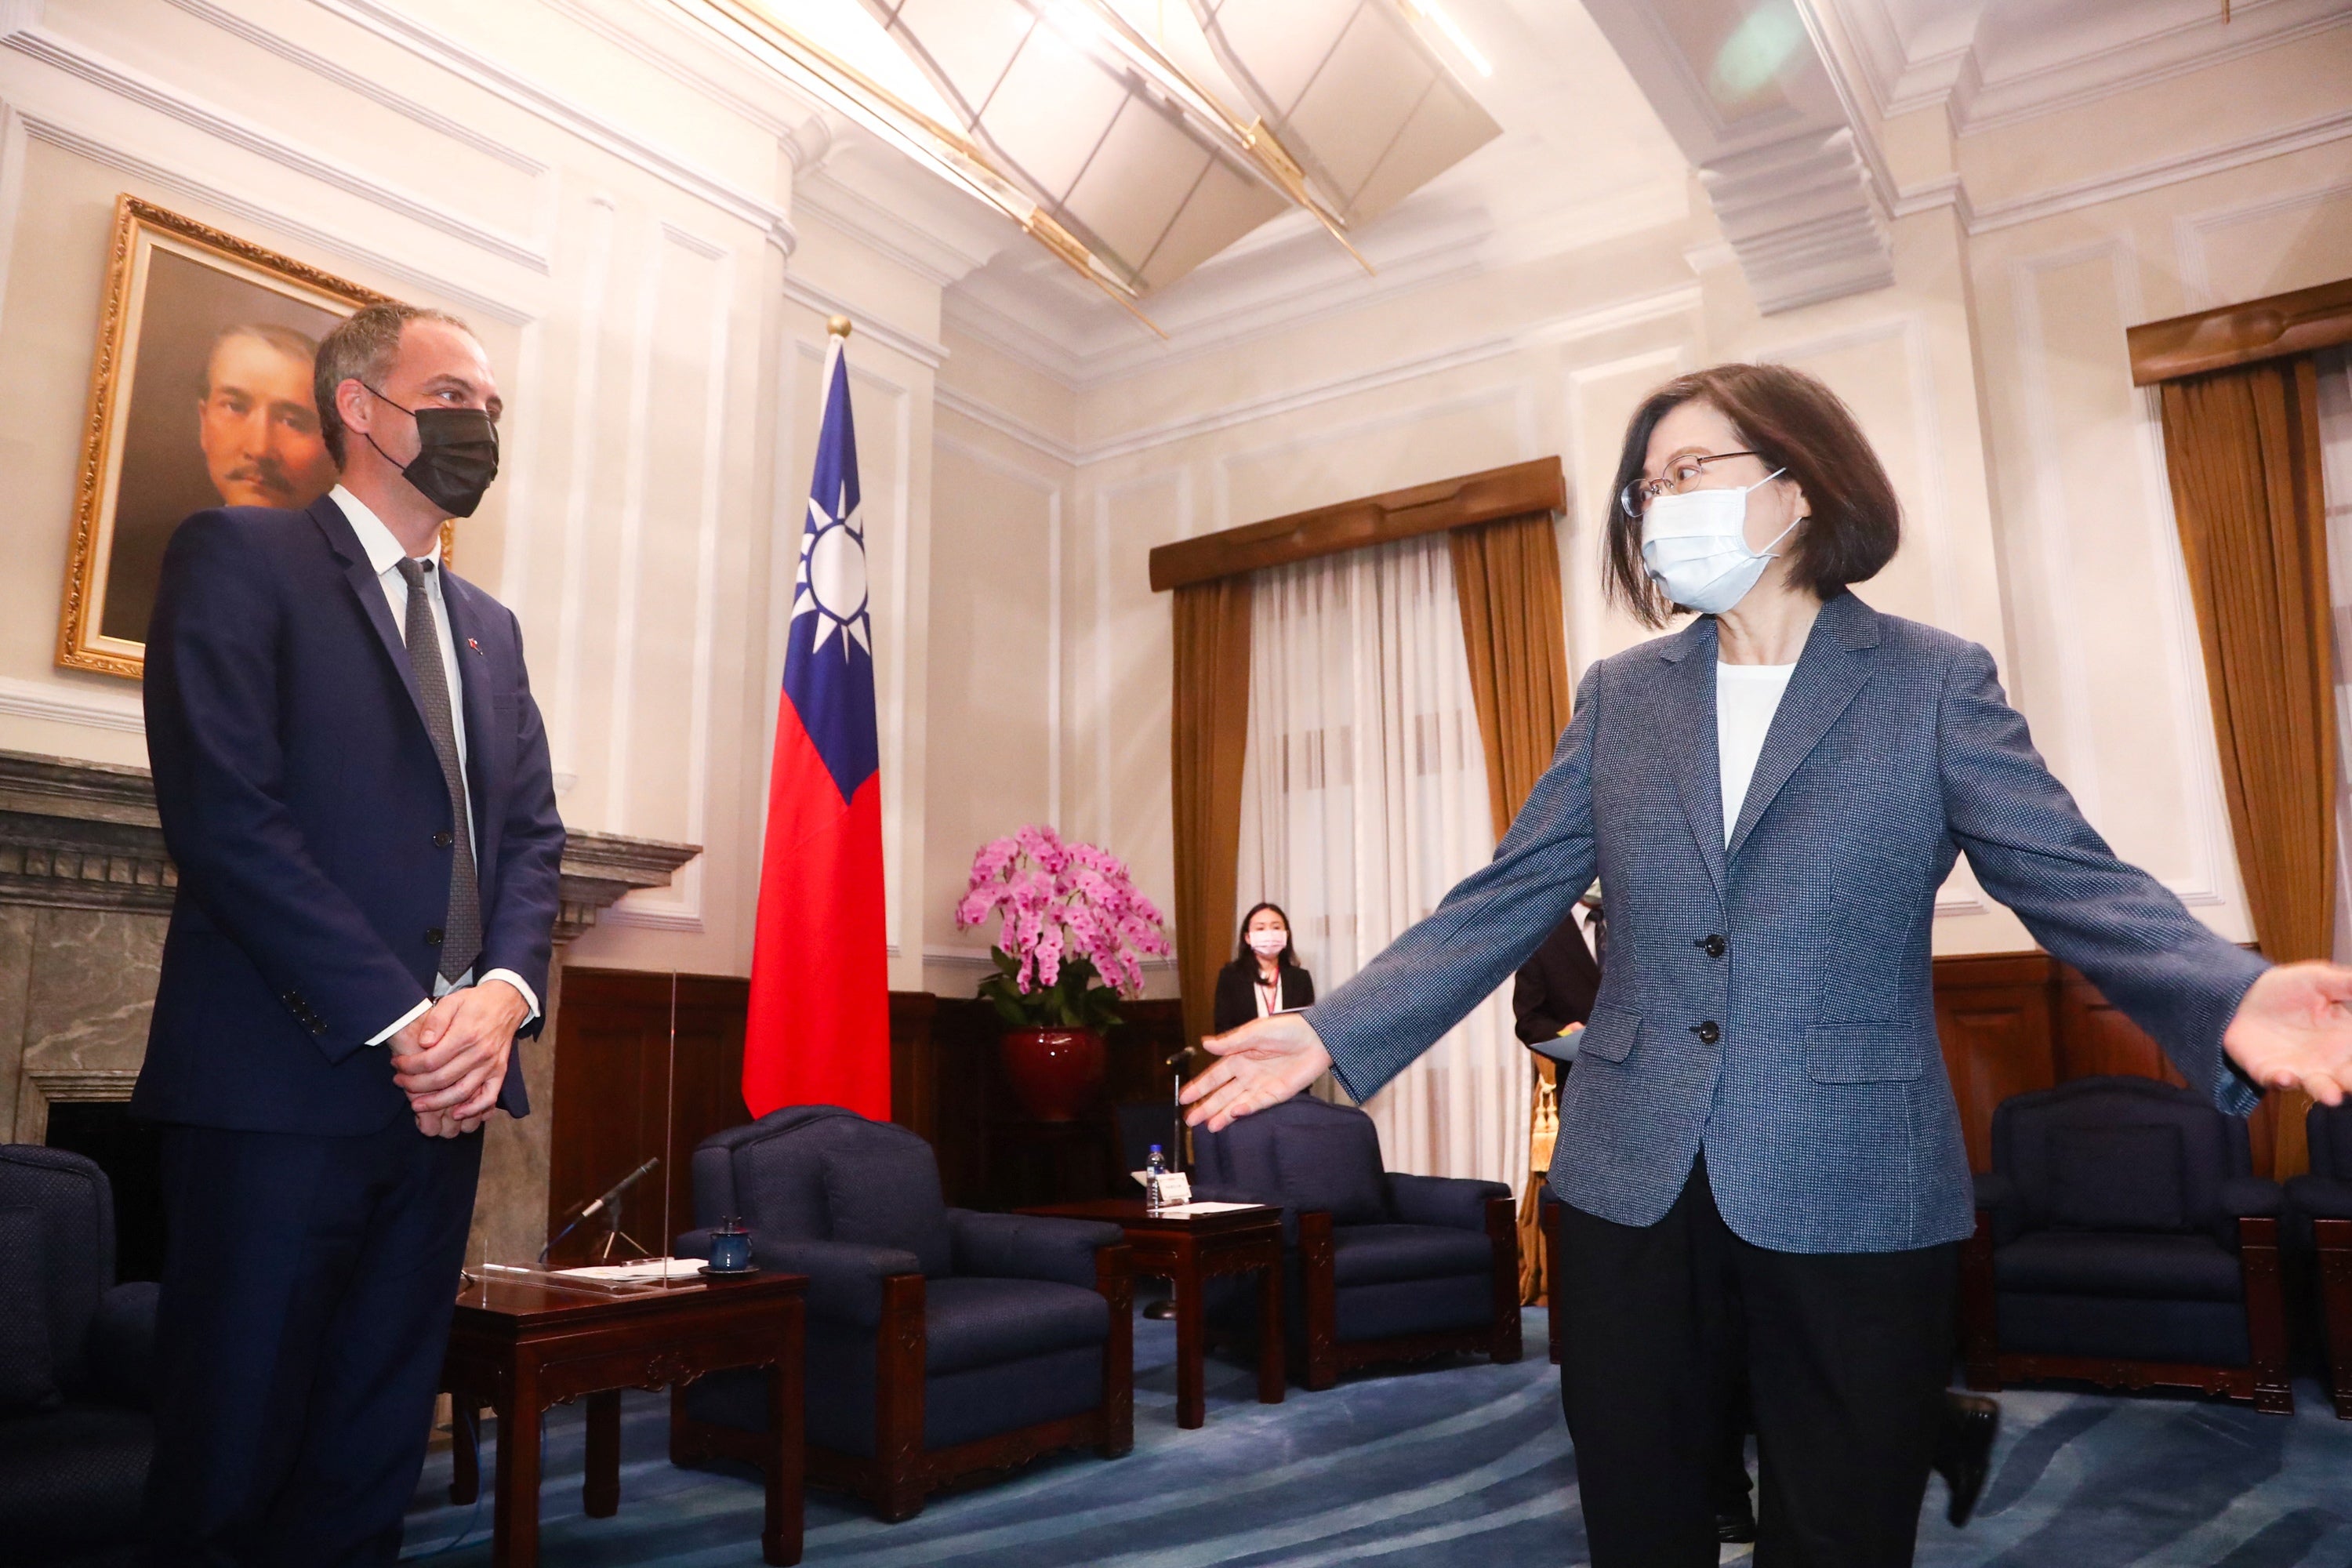 This picture taken and released on 4 November 2021 by CNA shows Taiwan President Tsai Ing-wen (R) next to the member of the European Parliament (MEP) Raphael Glucksmann at Taiwan’s Presidential Office